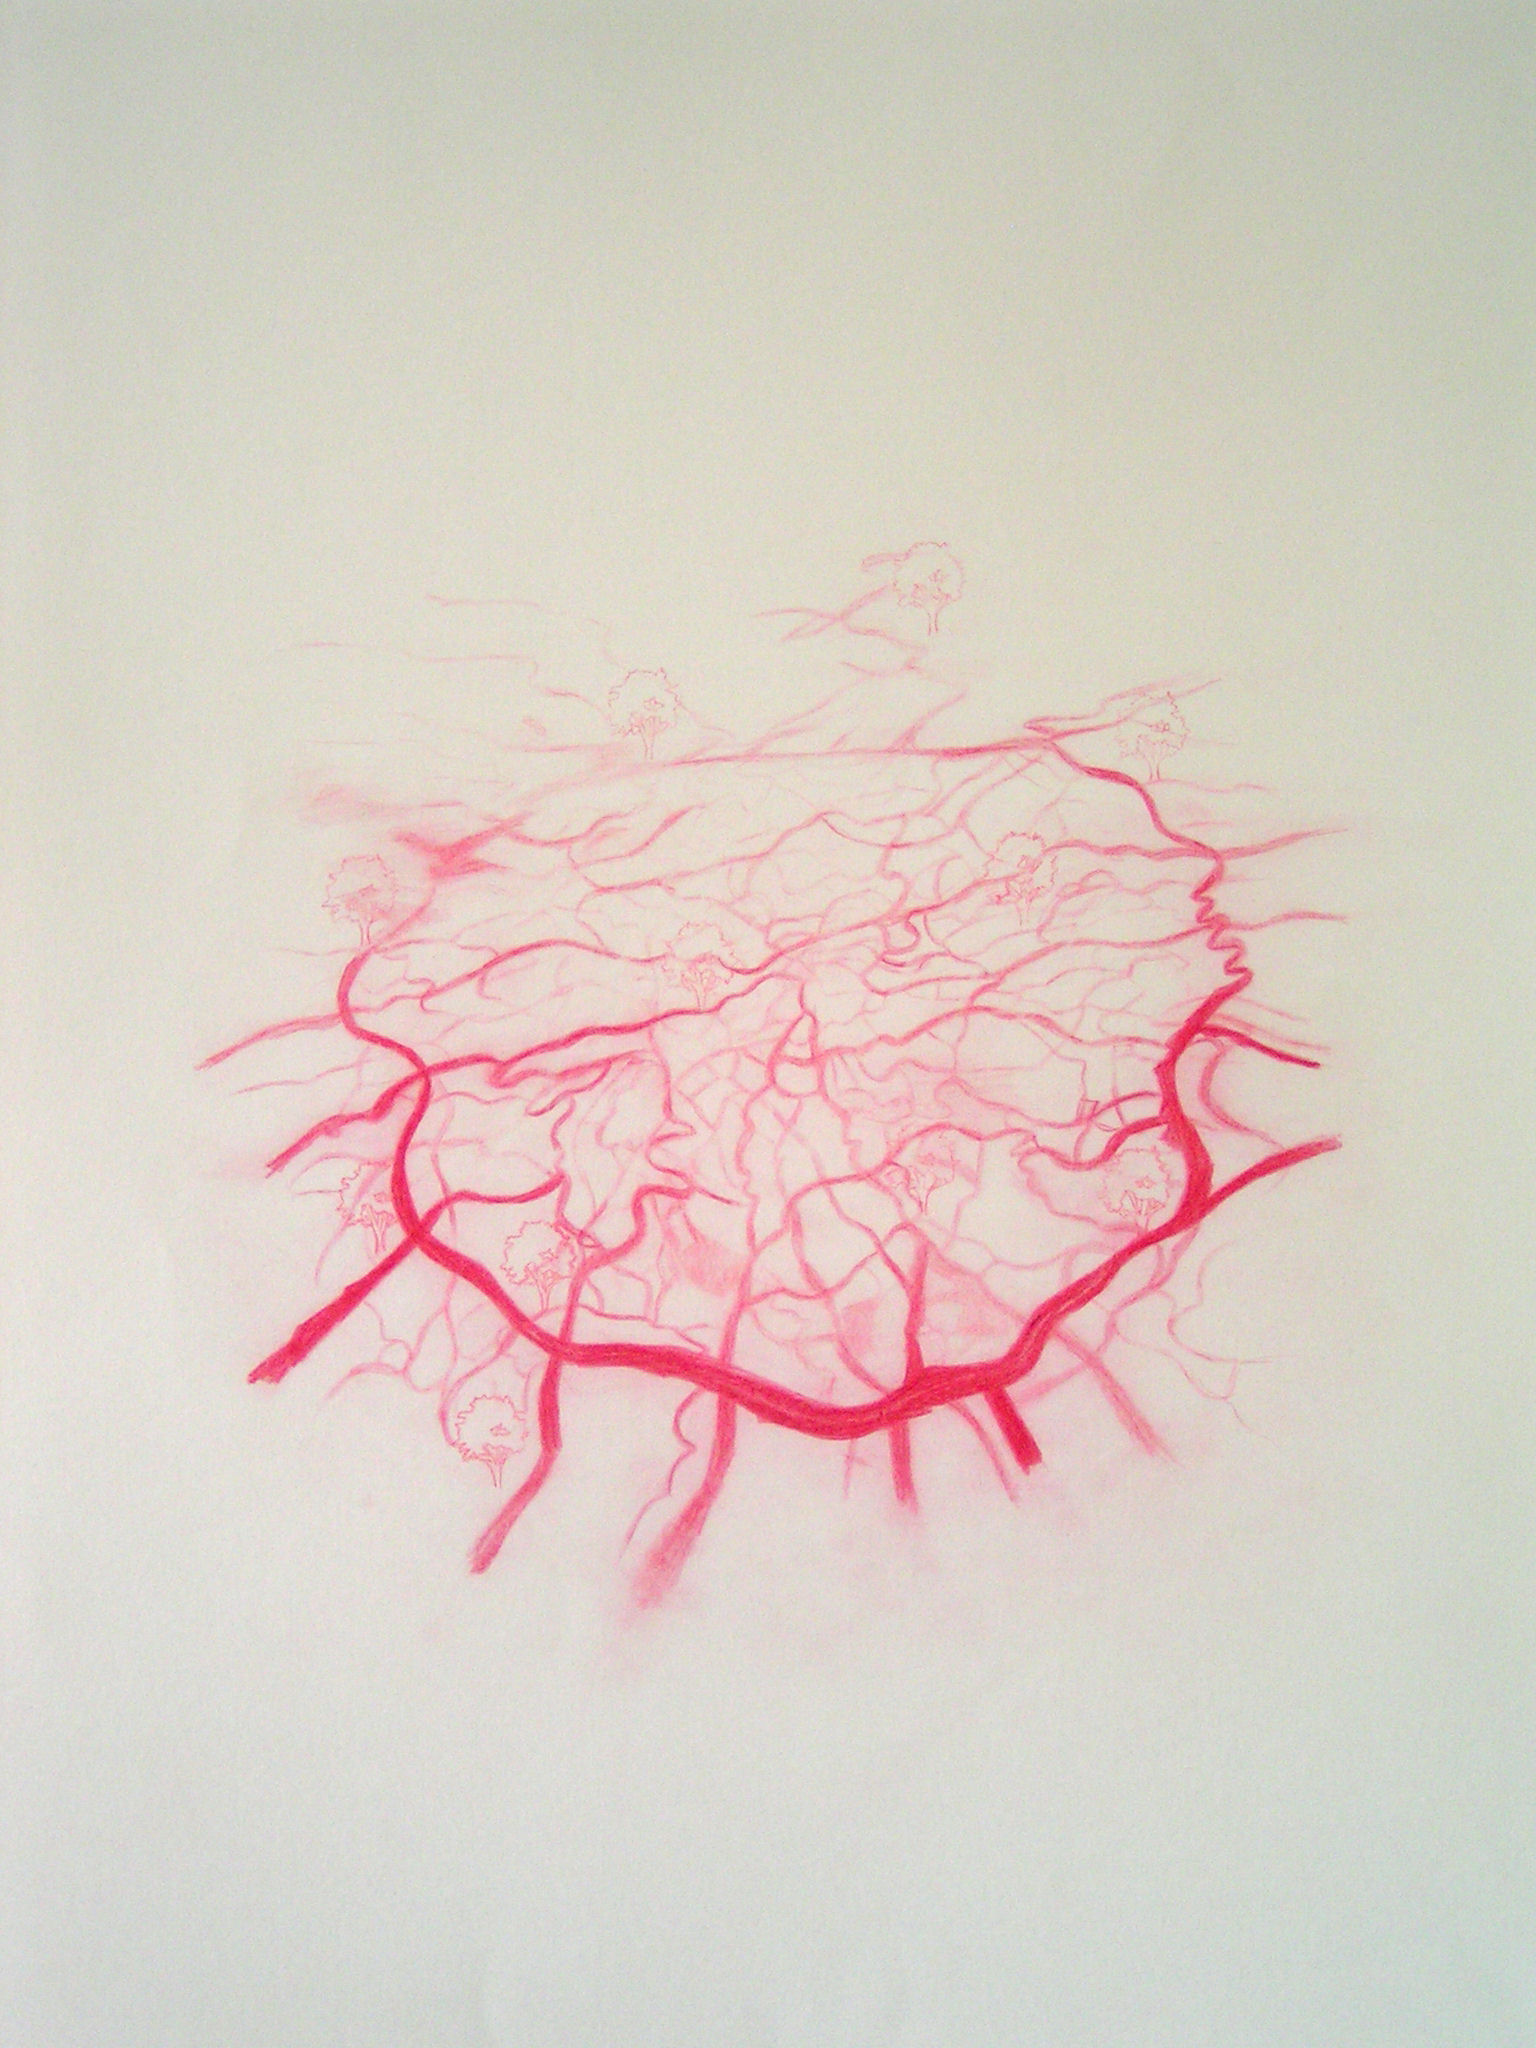 Emma J Williams 'Untitled Red Drawing No.2' pencil on paper